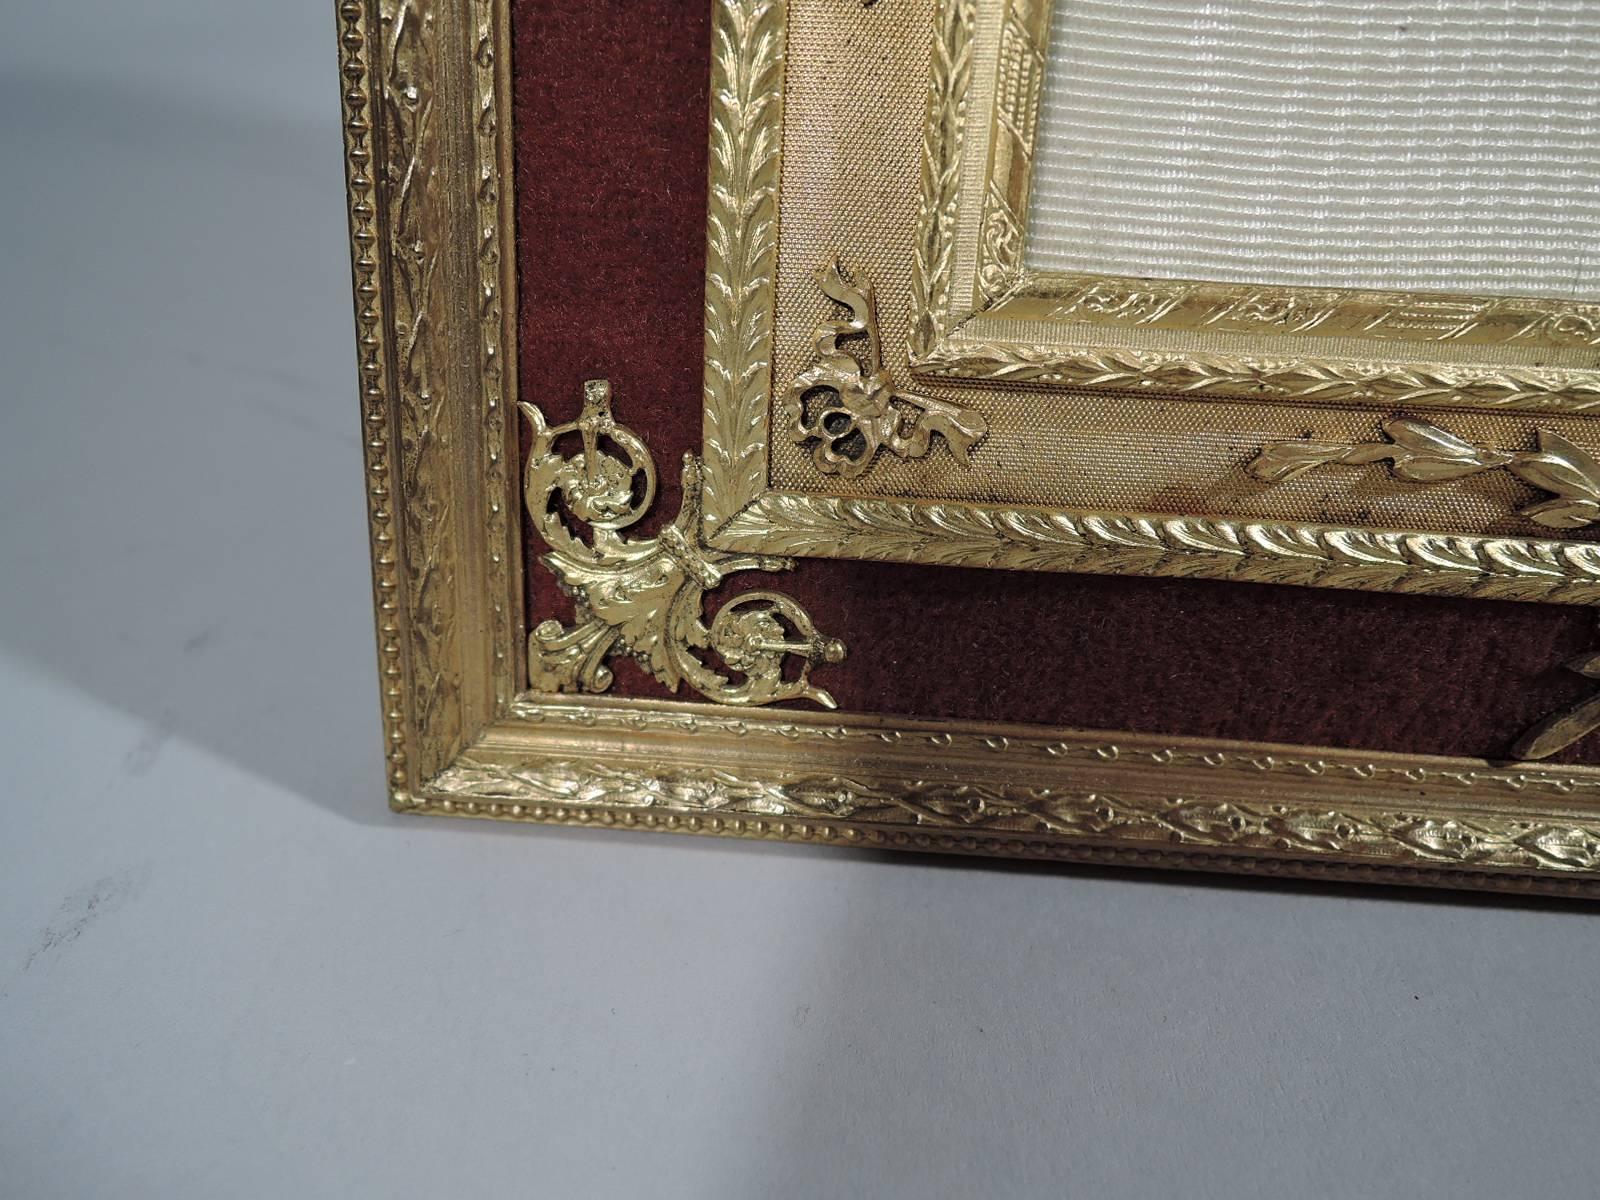 Rococo Revival Large Antique Rococo Gilt Bronze and Mother-of-Pearl Picture Frame